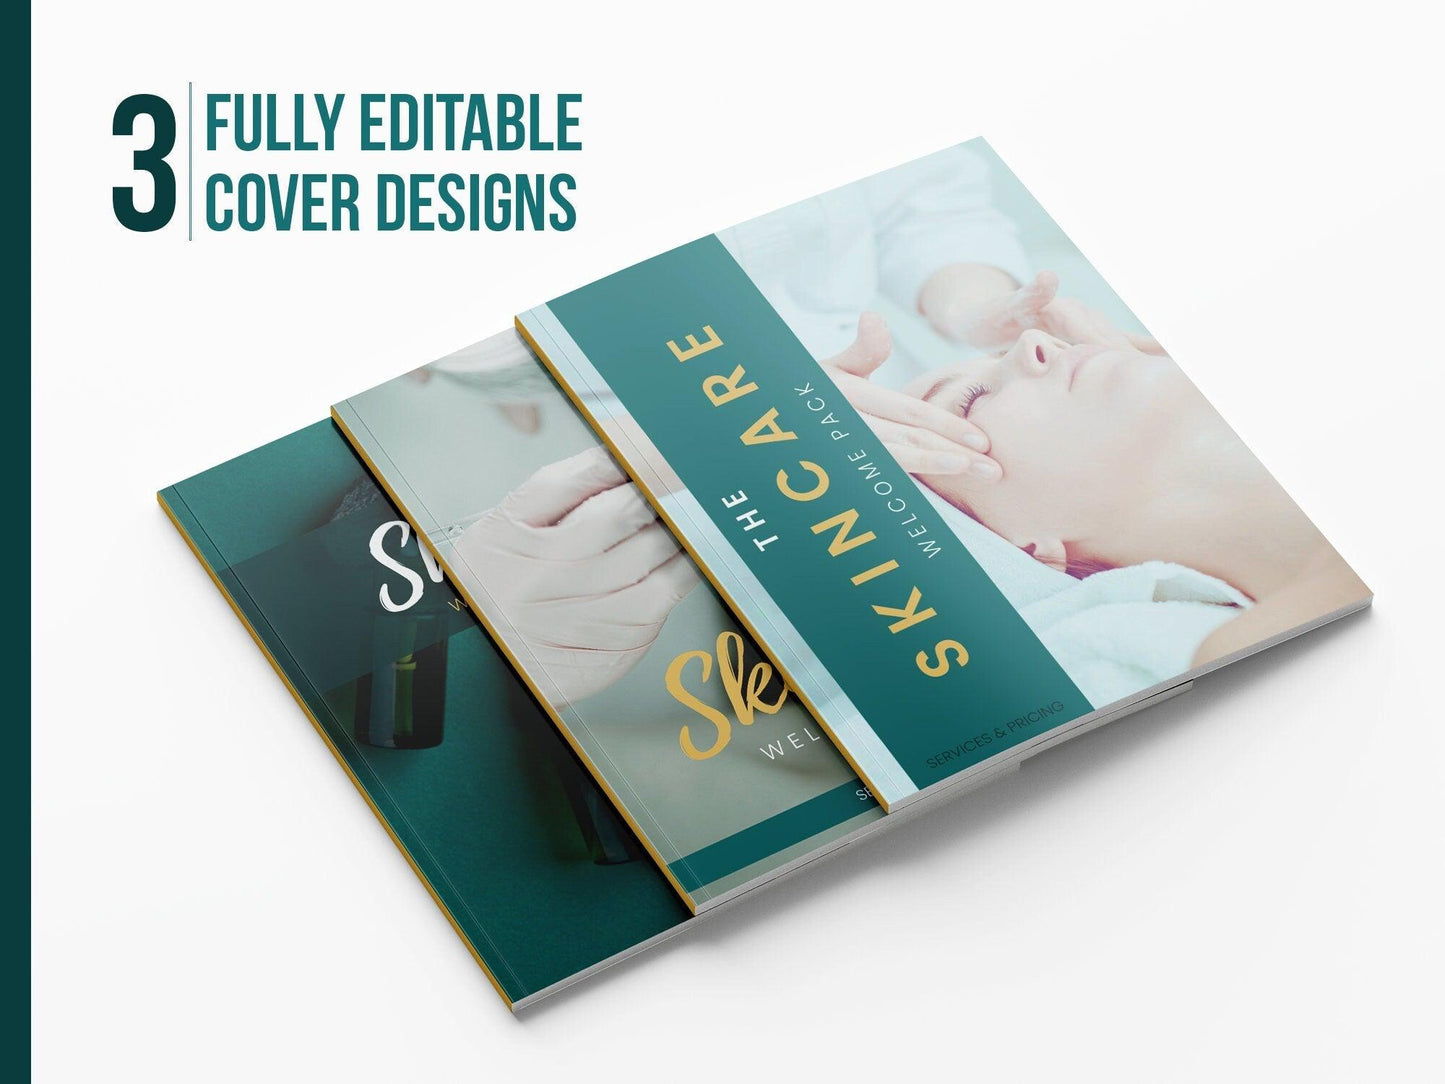 Skincare Client Welcome Pack Template (emerald)